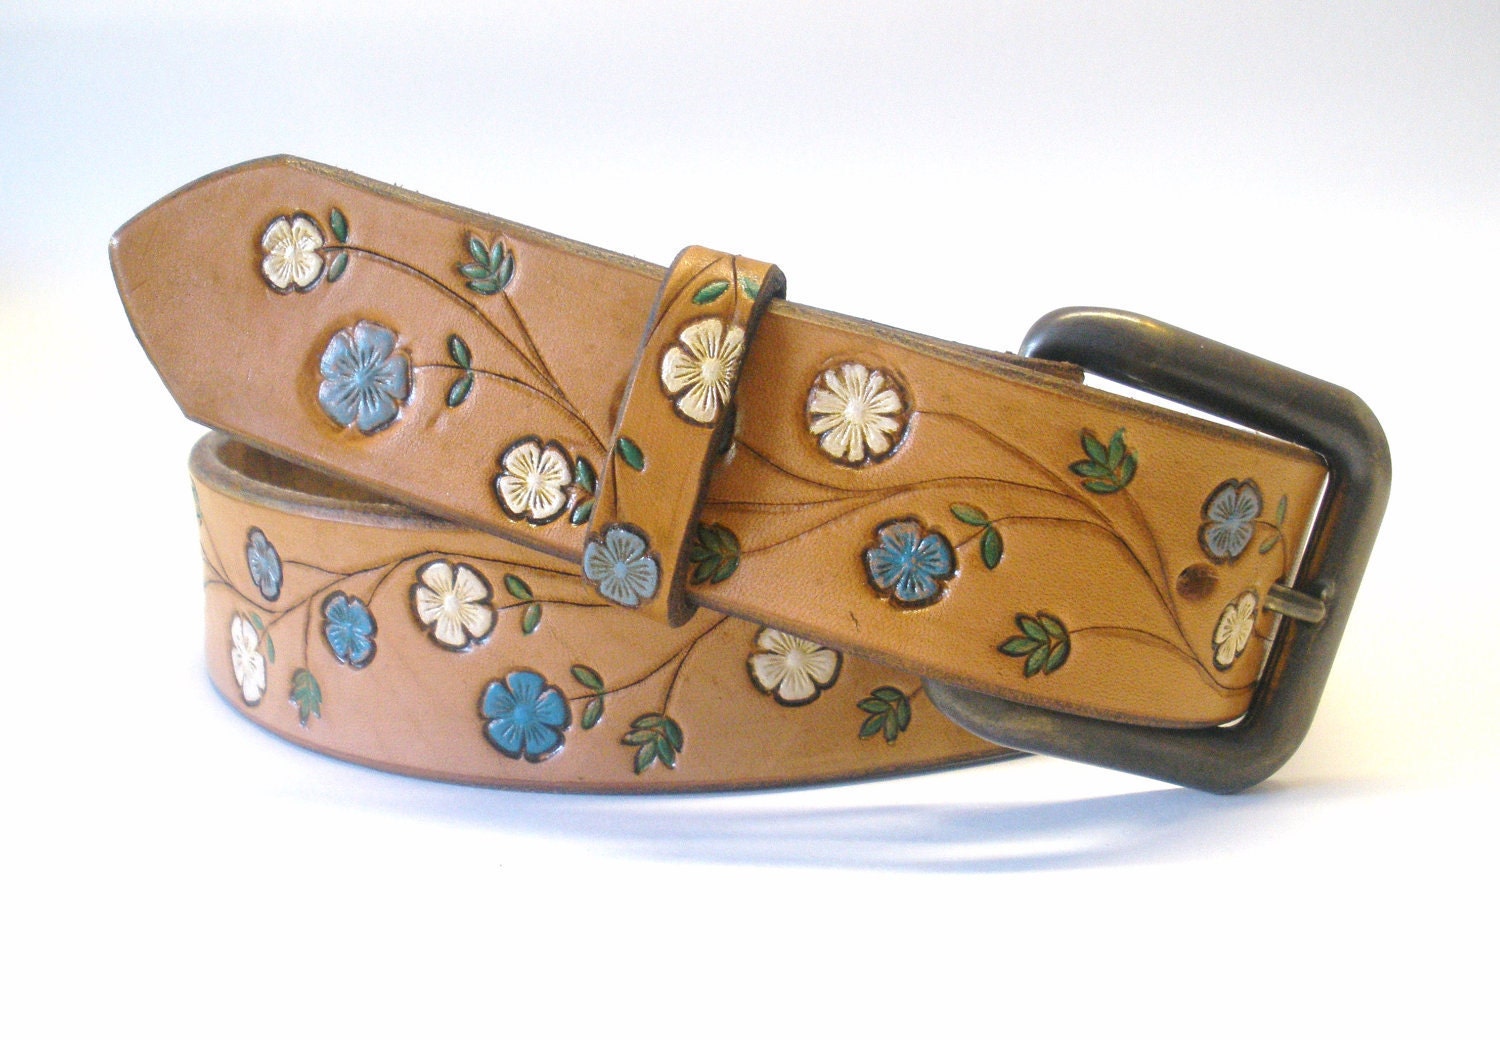 Tan Brown Leather Belt with Blue and Cream Hand Stamped Flowers Retro Boho Hippie Women's Leather Belt - BirdhouseDesigns